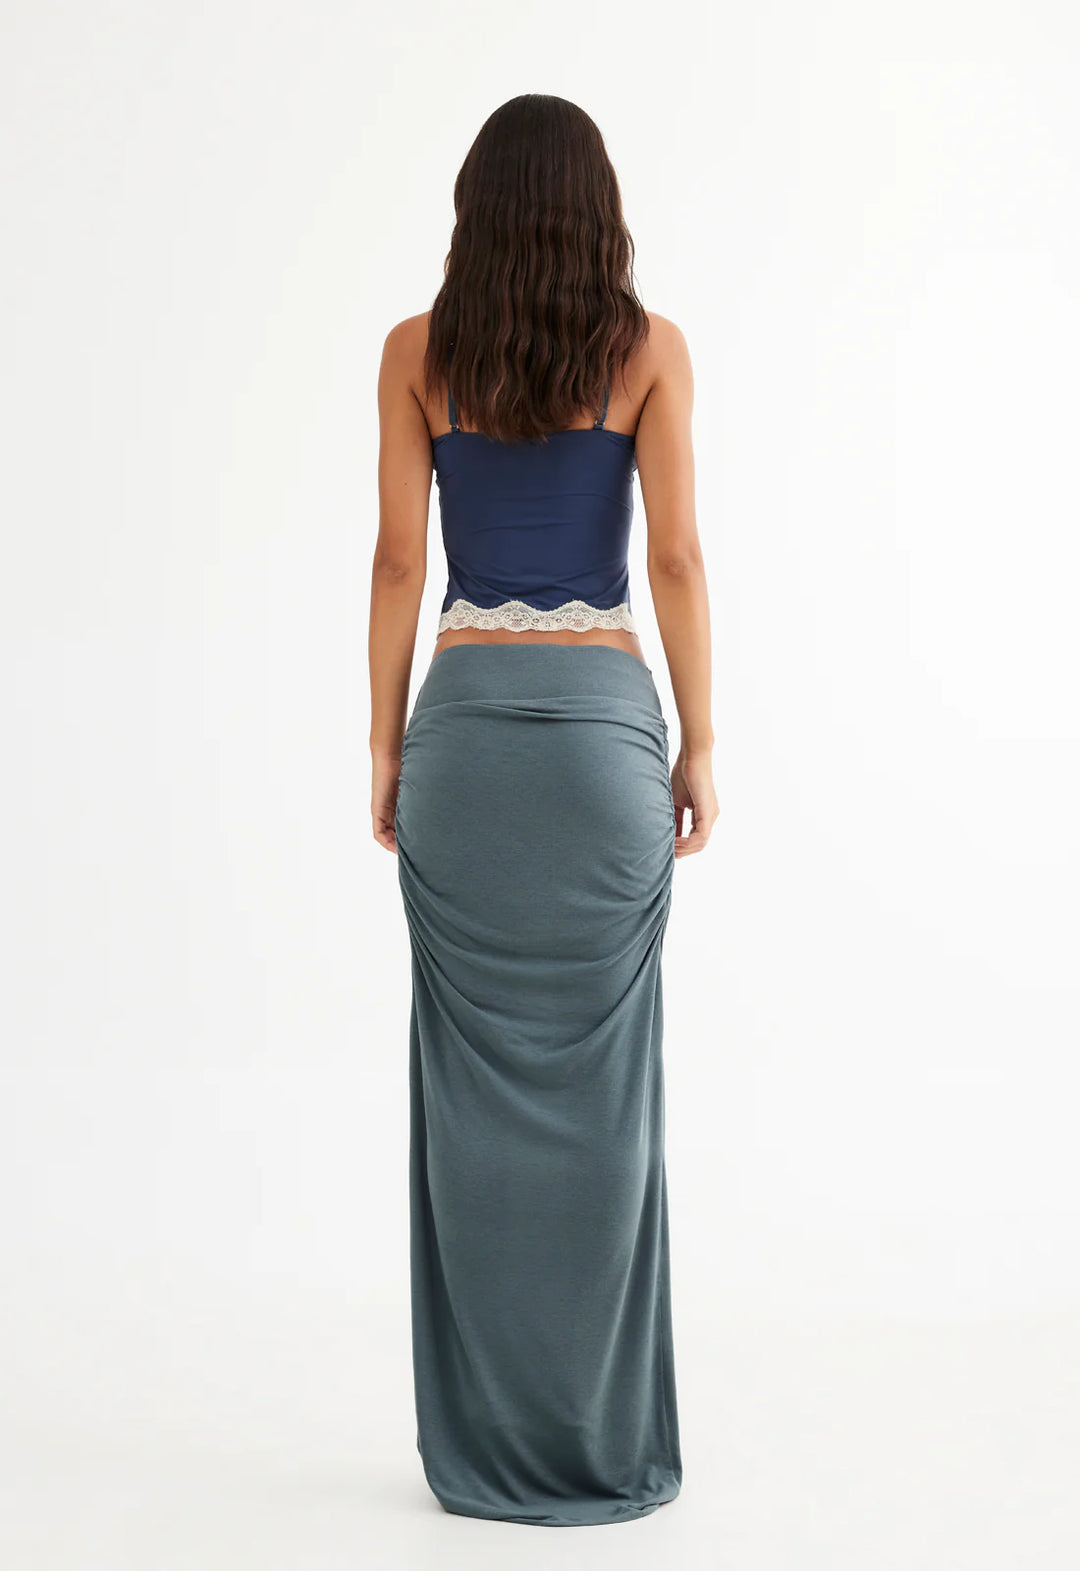 Lioness Almost Famous Maxi Skirt - Pewter